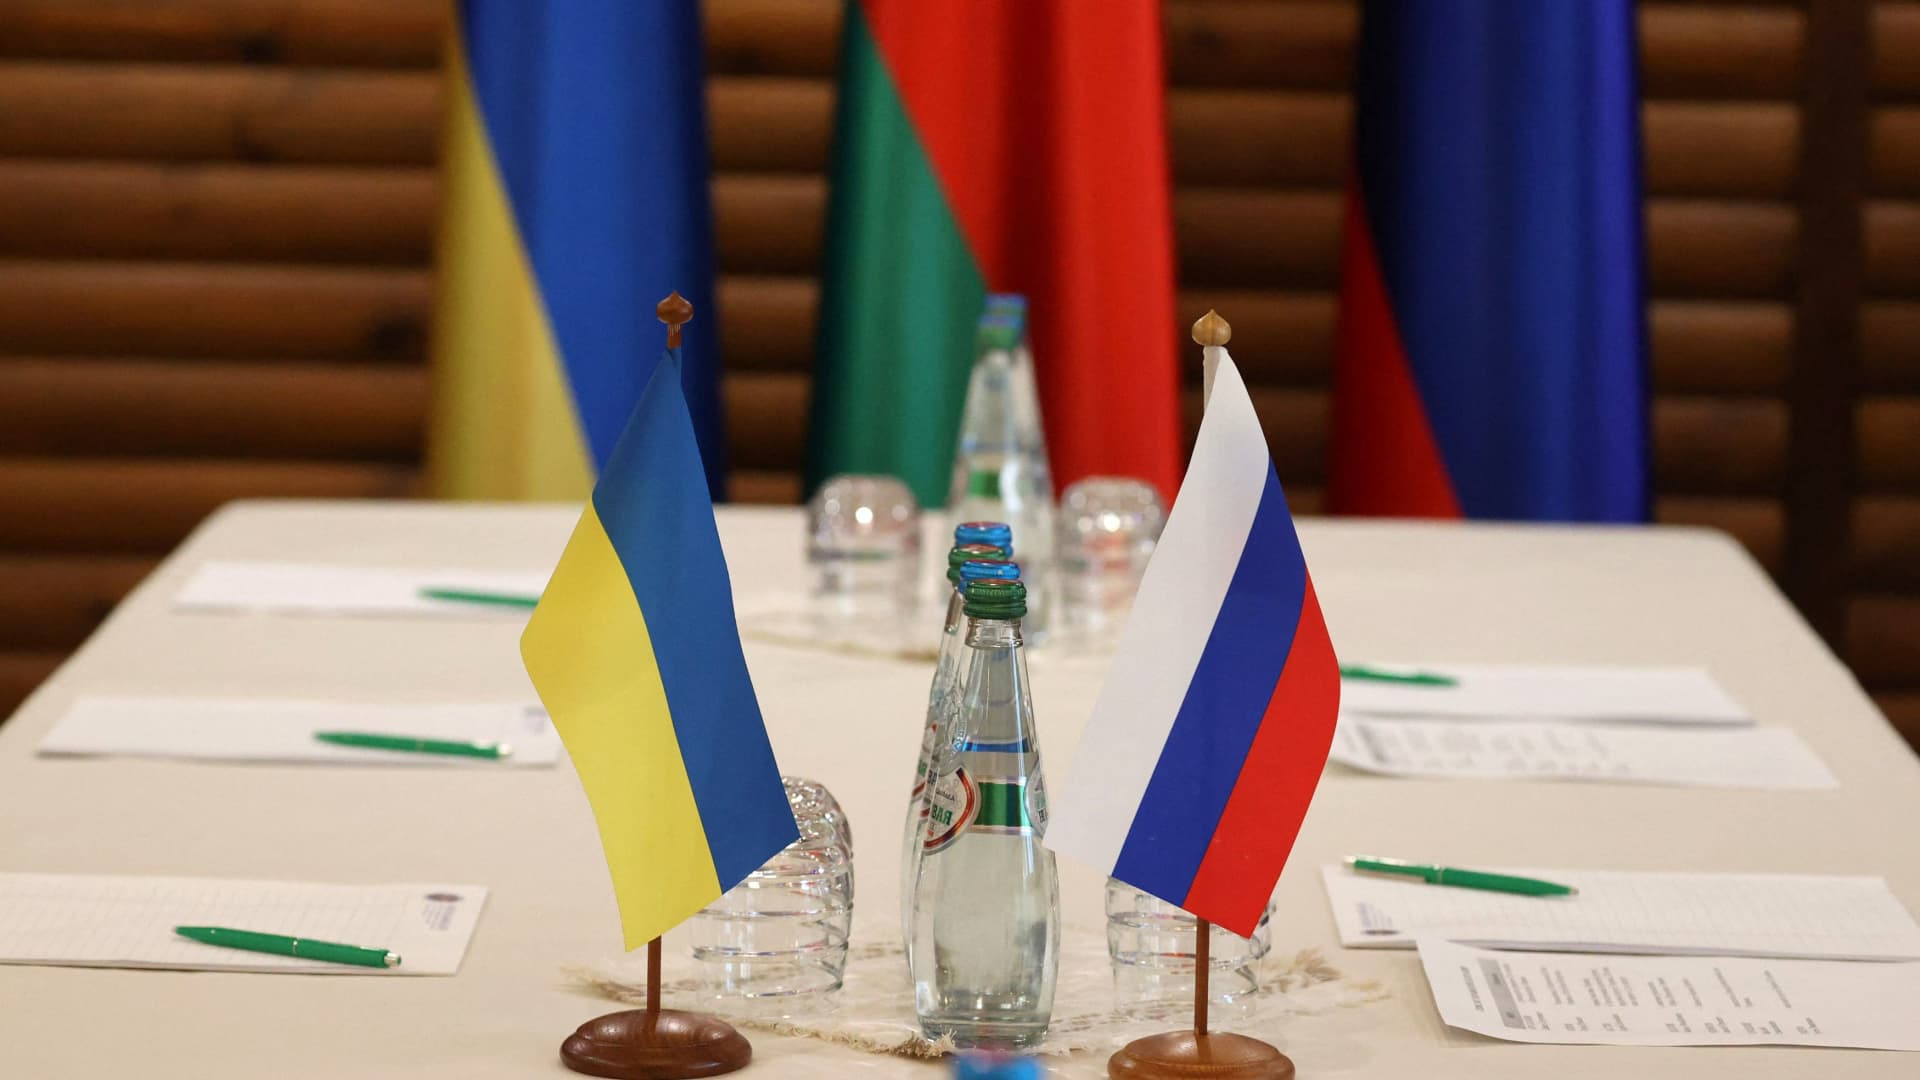 Ukrainian and Russian flags are seen on a table before the talks between officials of the two countries in the Brest region, Belarus March 3, 2022.